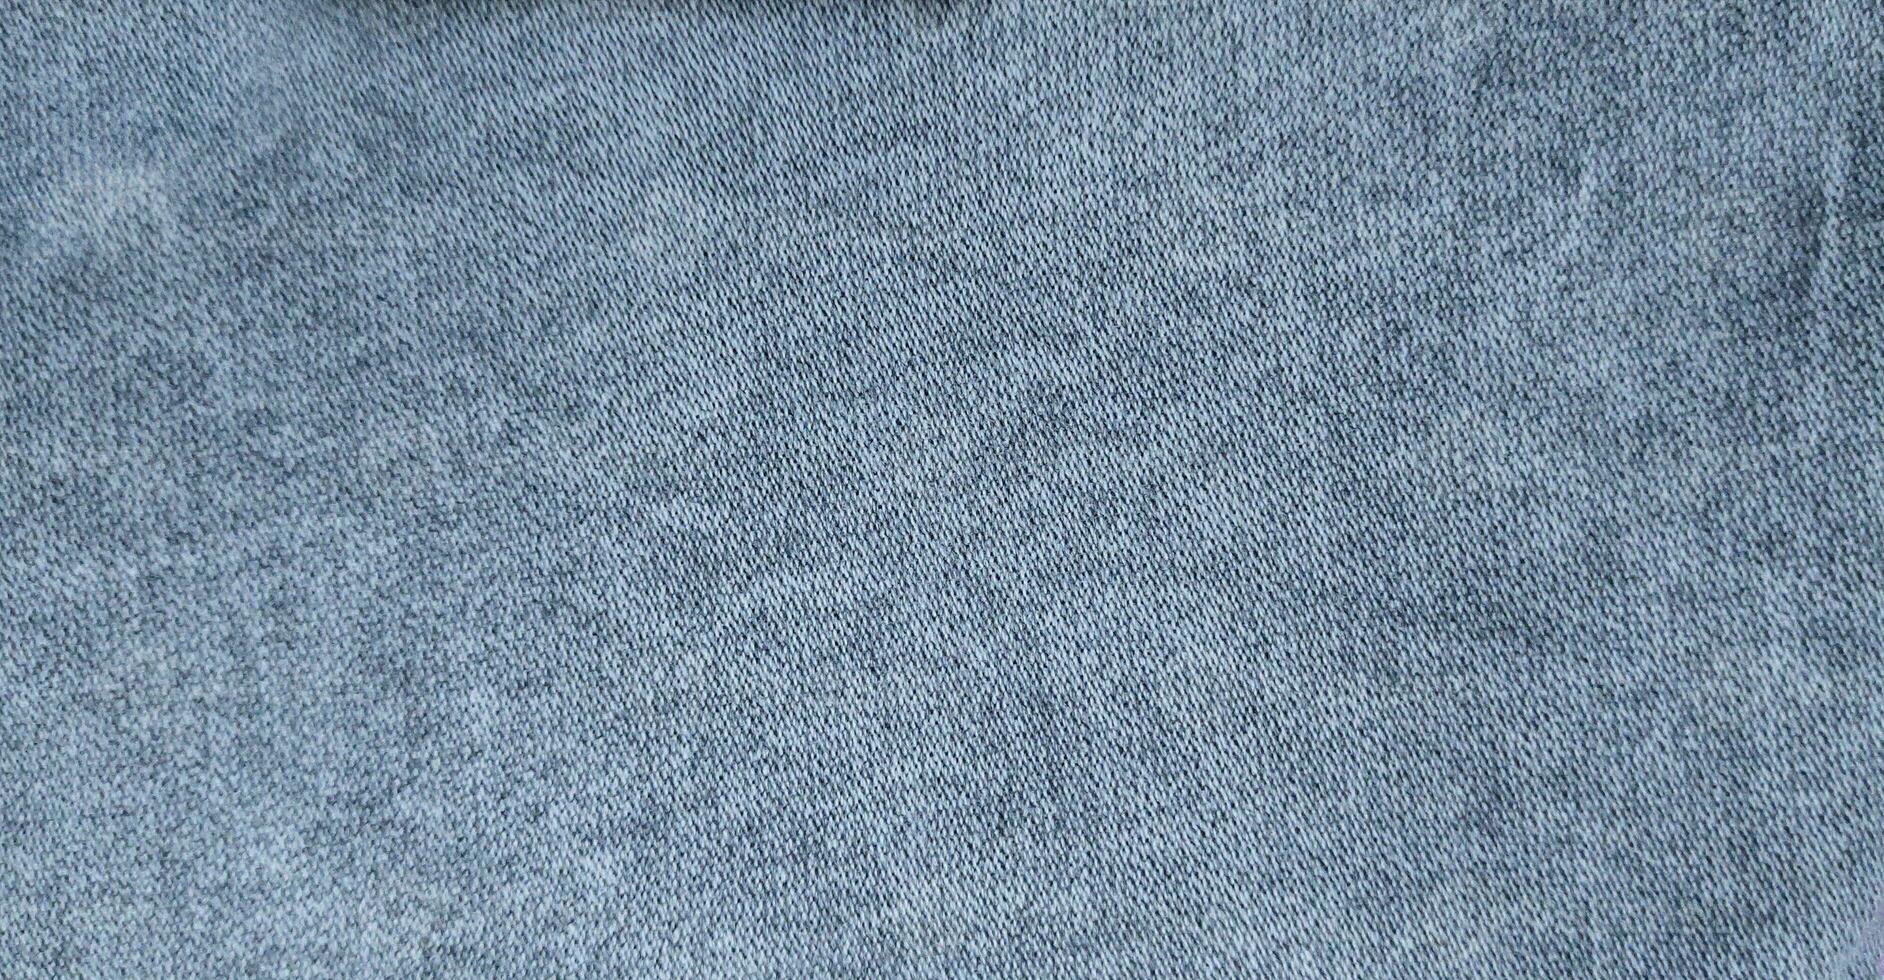 jean, denim, fabric, blue, textile, material, cotton, background, texture, fashion, canvas, pattern, closeup, cloth, wear, surface, abstract, clothing, style, garment photo